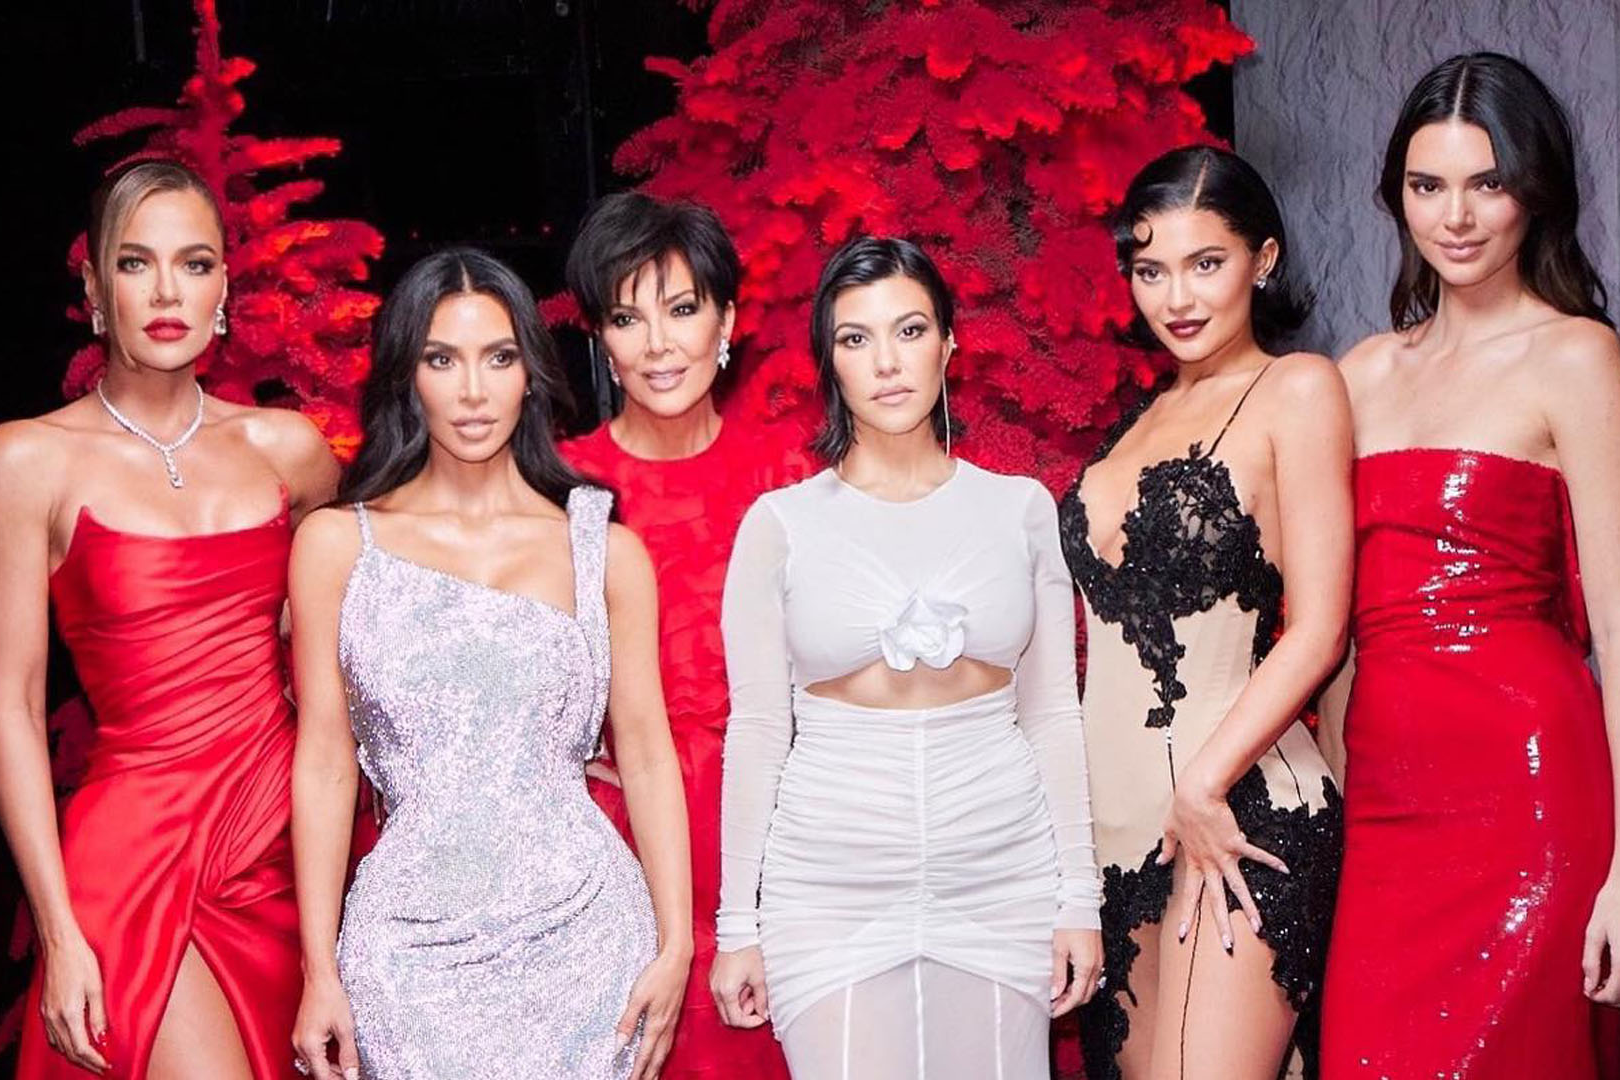 Khloe, Kim, Kris, Kourtney, Kylie and Kendall, the invincible women of the Kardashian family at a red carpet event.